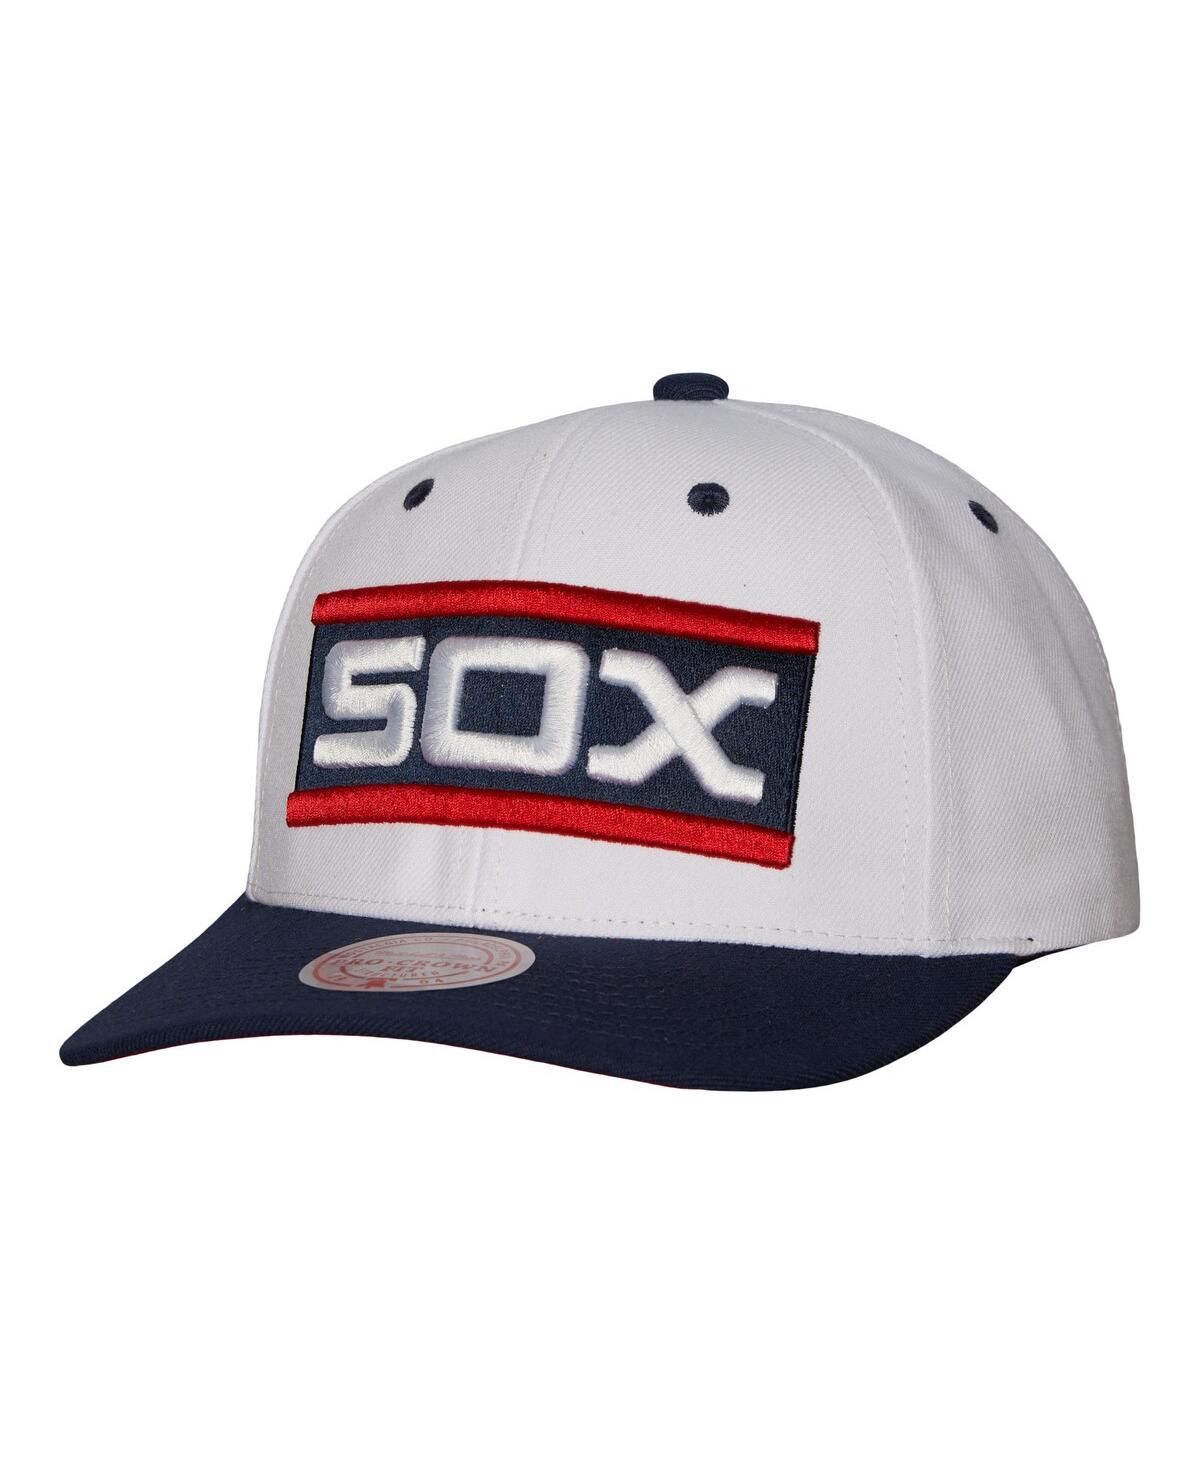 Shop Mitchell & Ness Men's  White Chicago White Sox Cooperstown Collection Pro Crown Snapback Hat